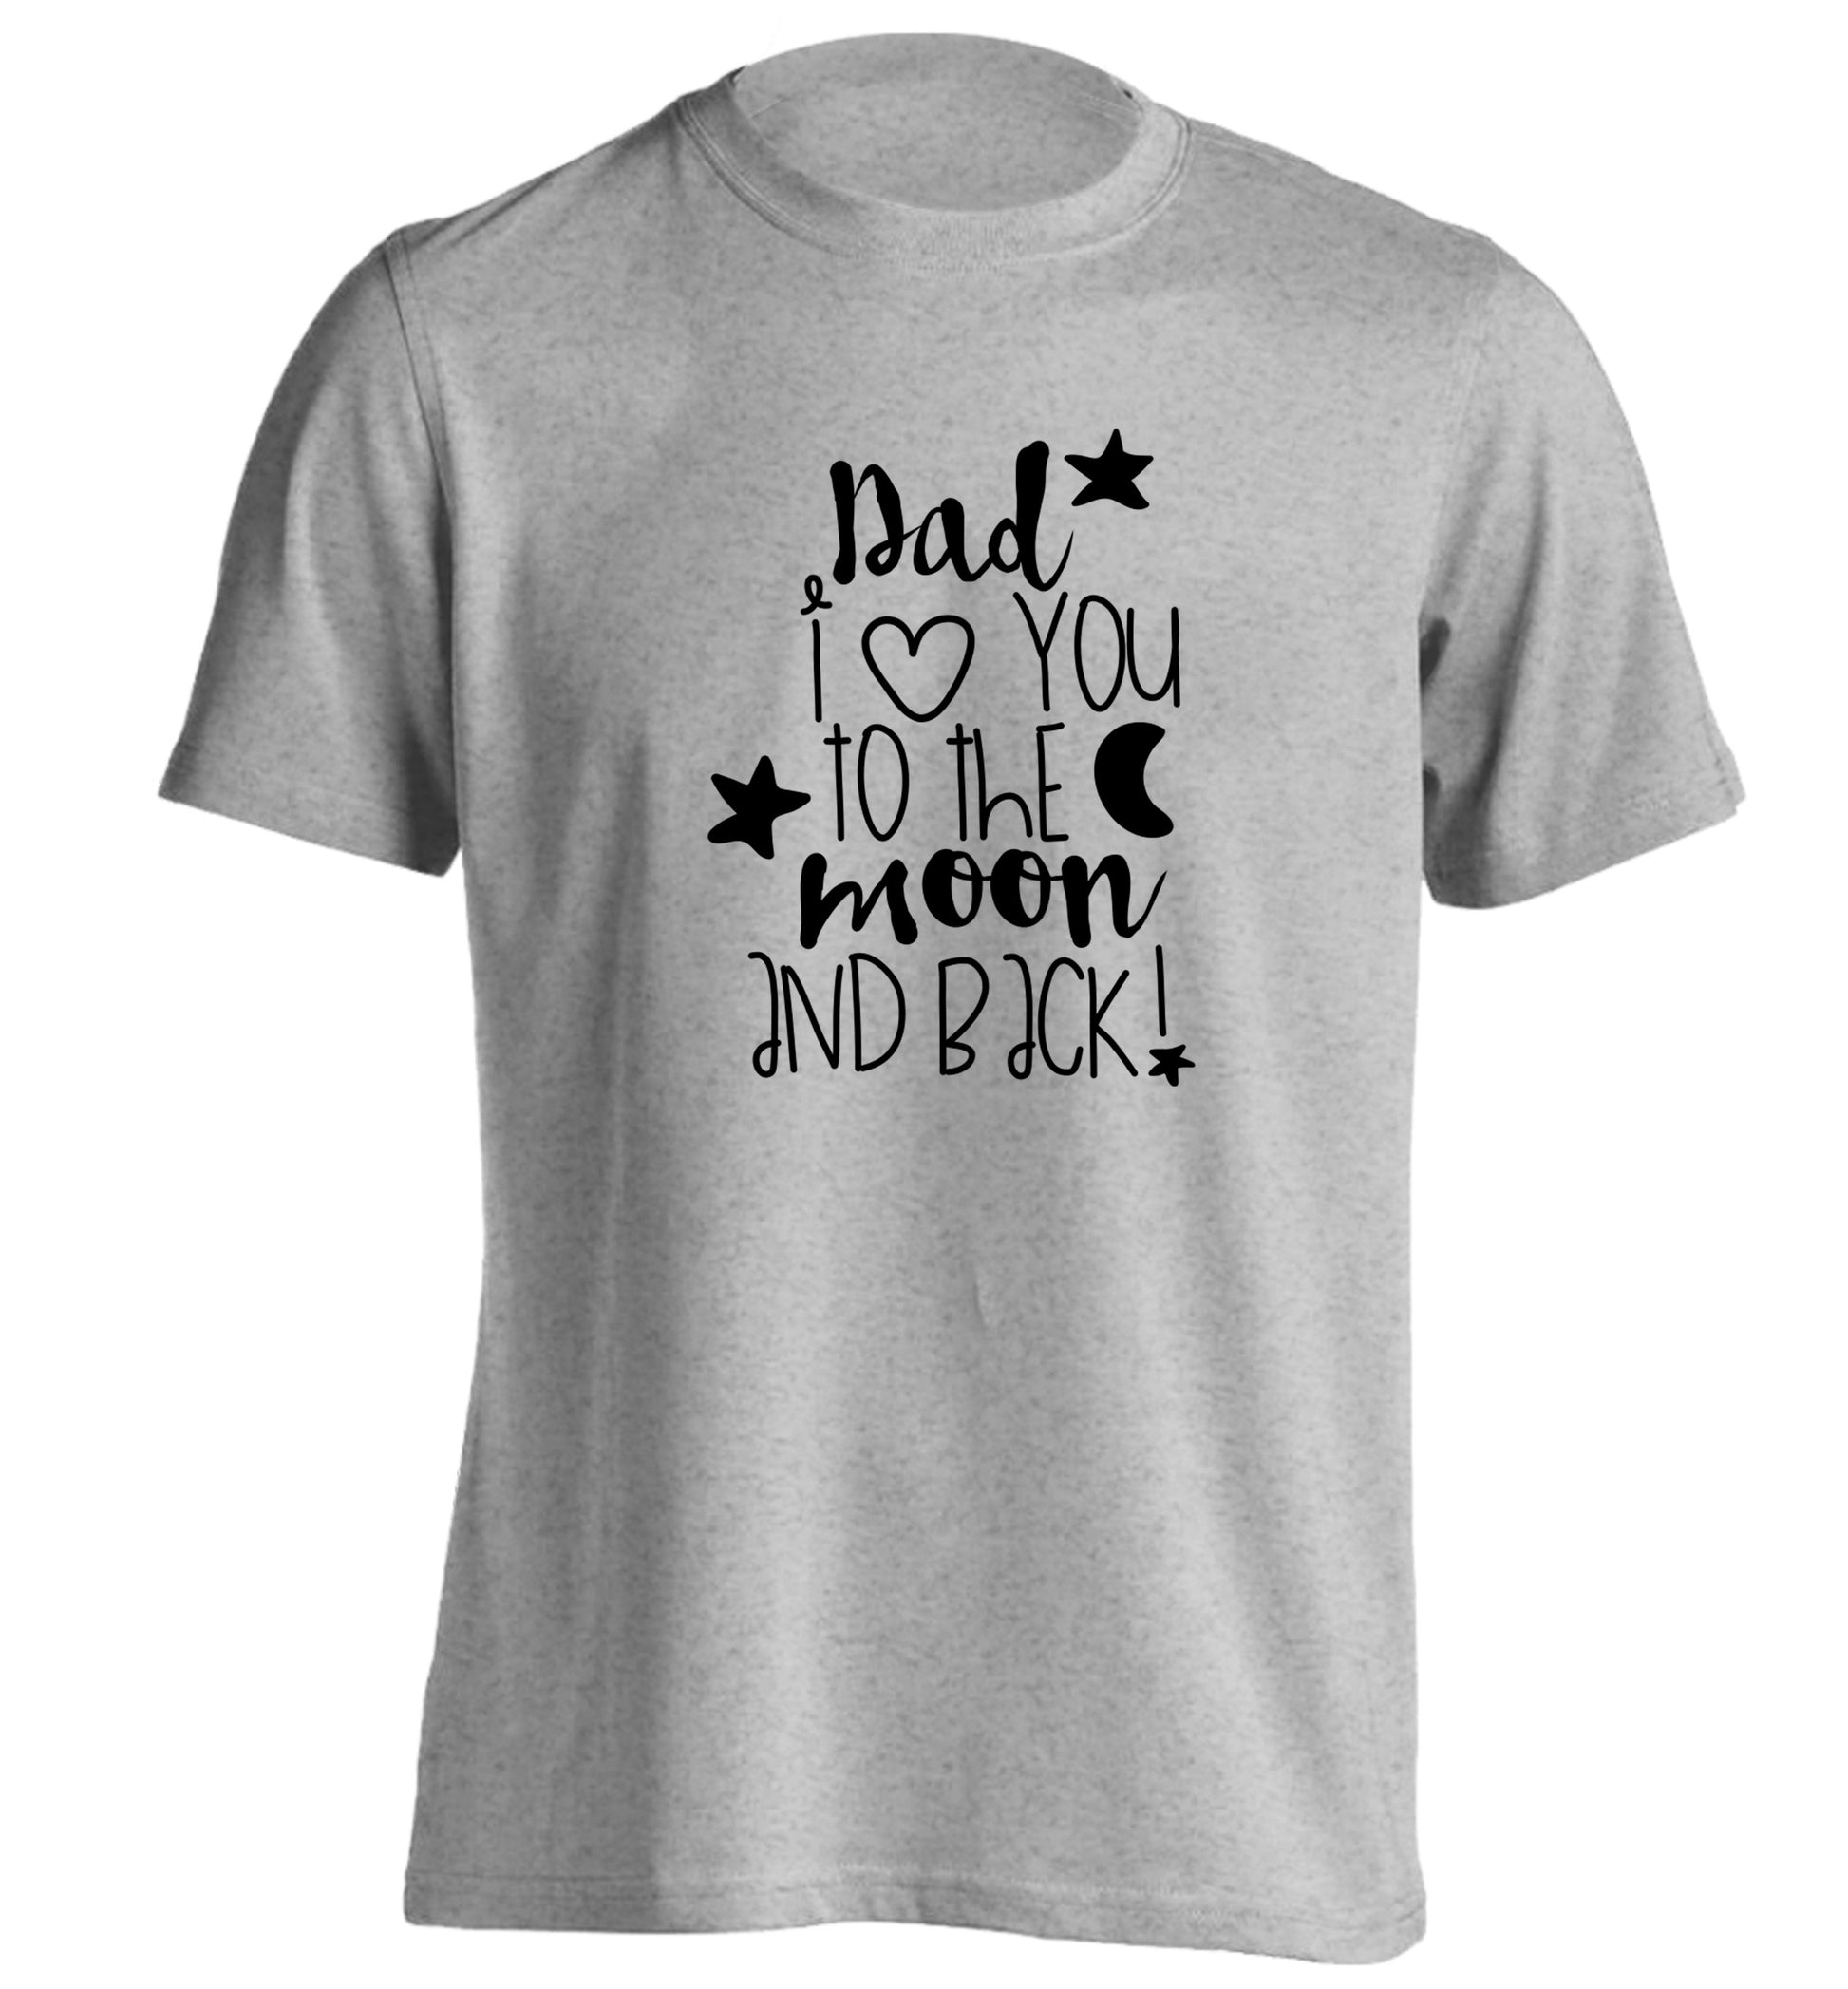 Dad I love you to the moon and back adults unisex grey Tshirt 2XL